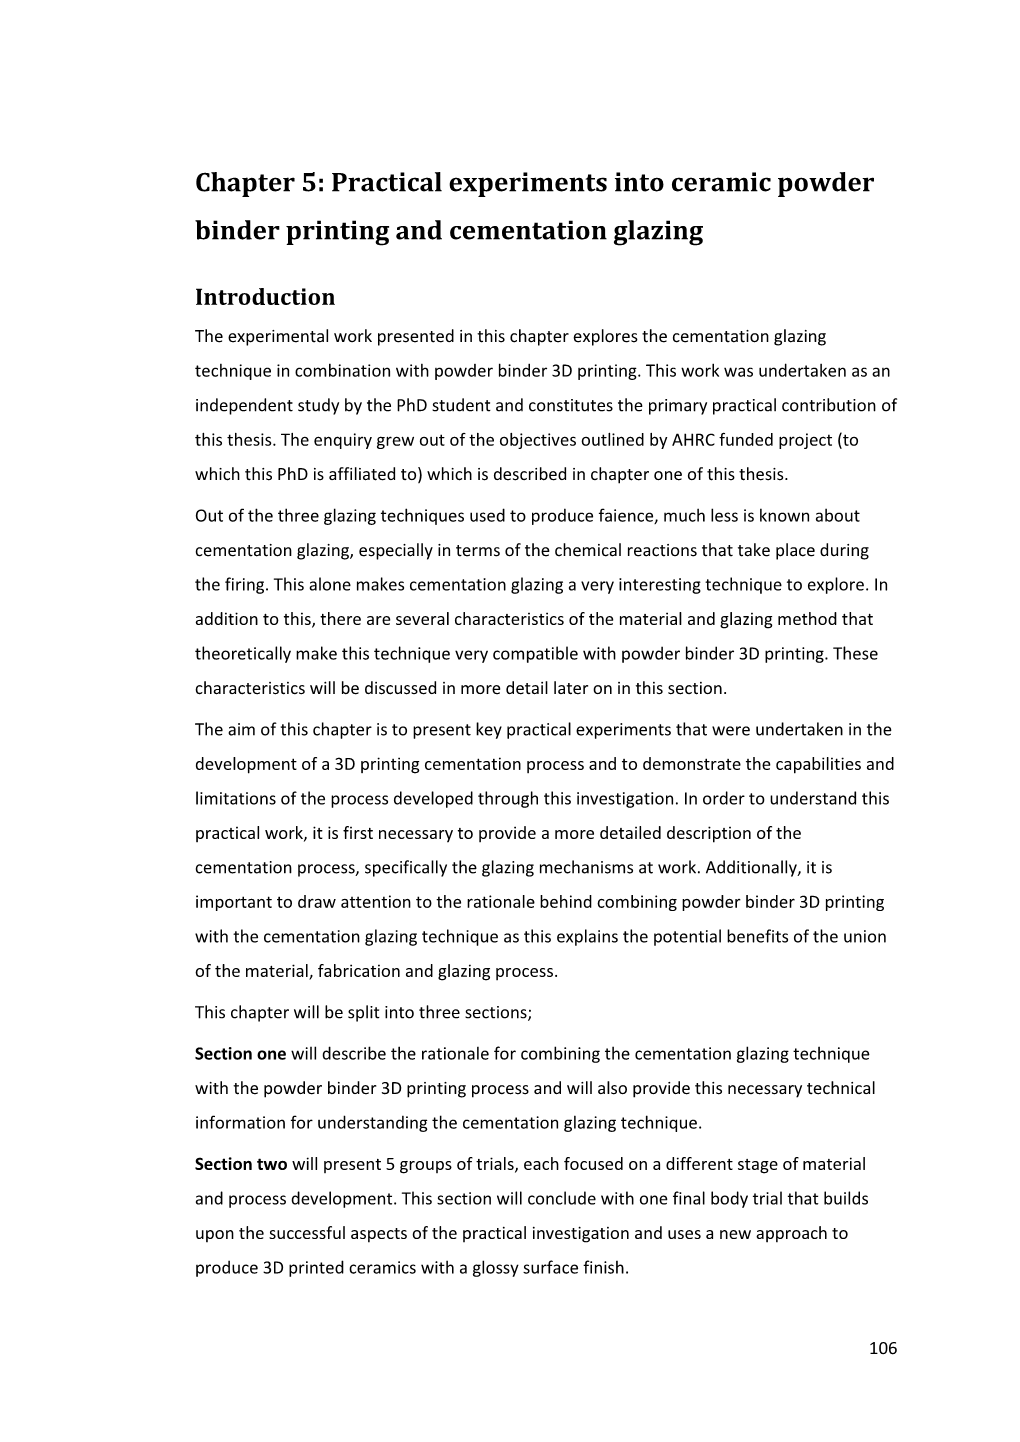 Chapter 5: Practical Experiments Into Ceramic Powder Binder Printing and Cementation Glazing